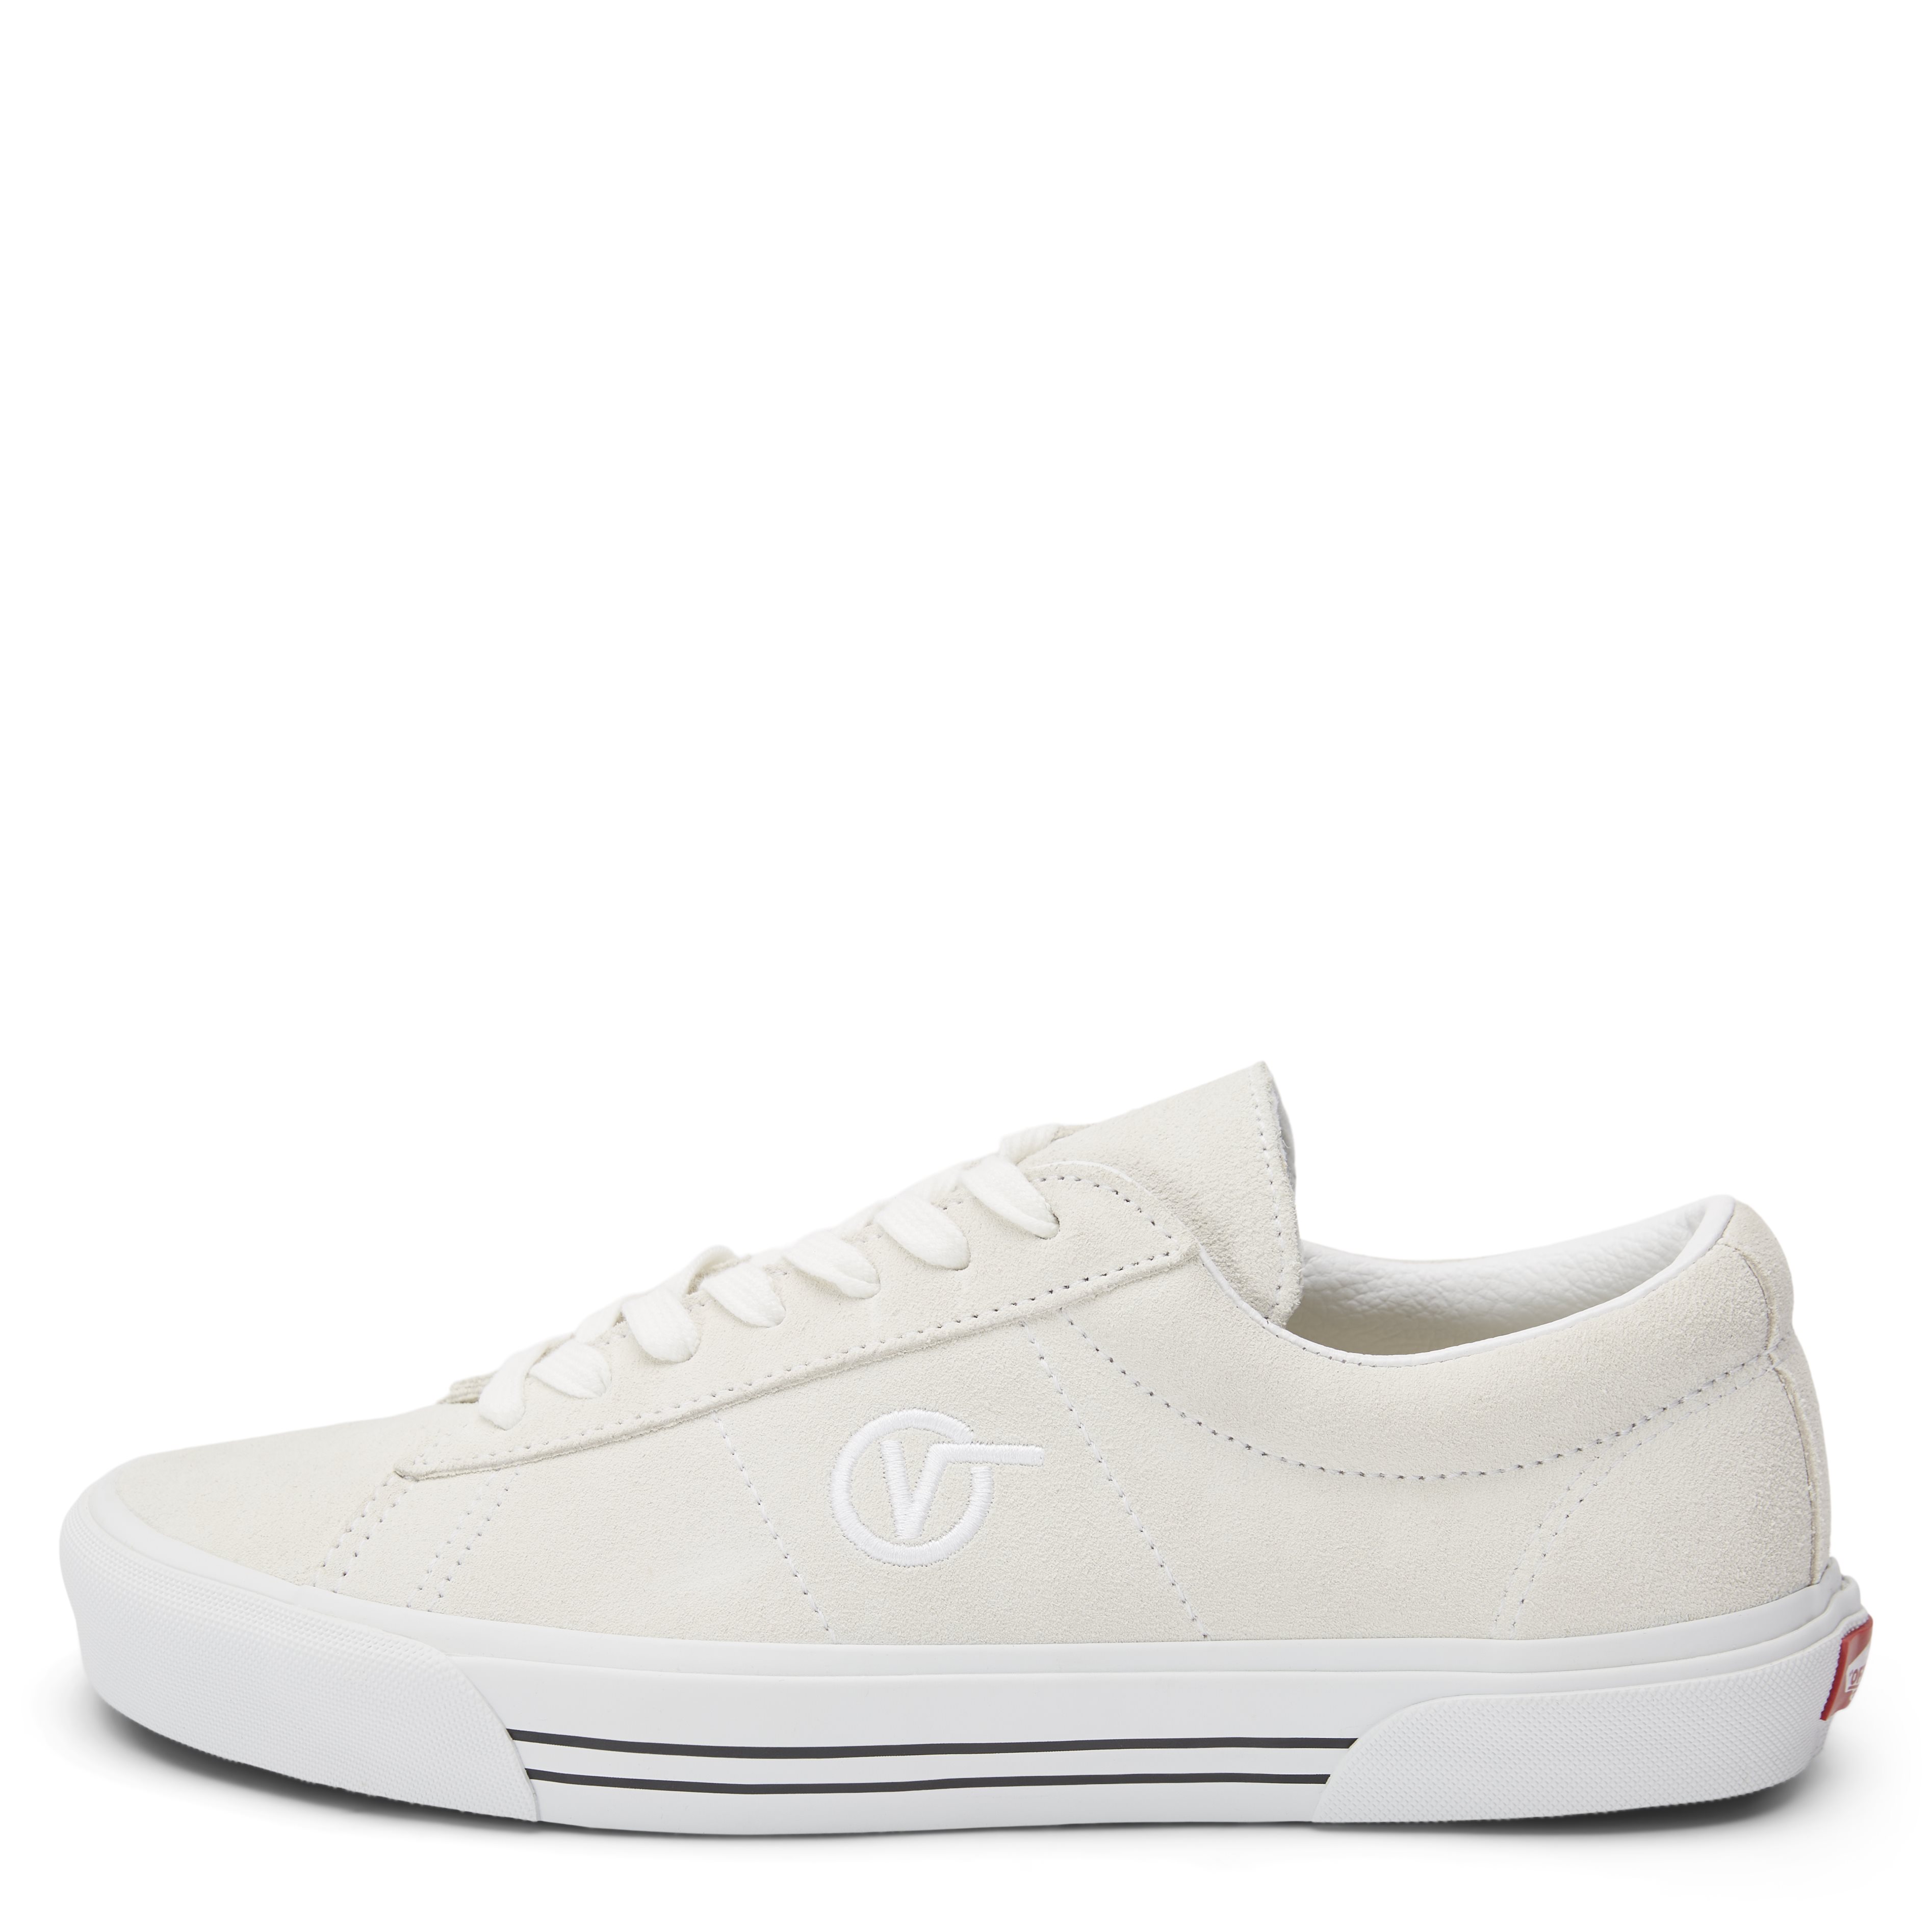 Sid Sneaker - Shoes - White